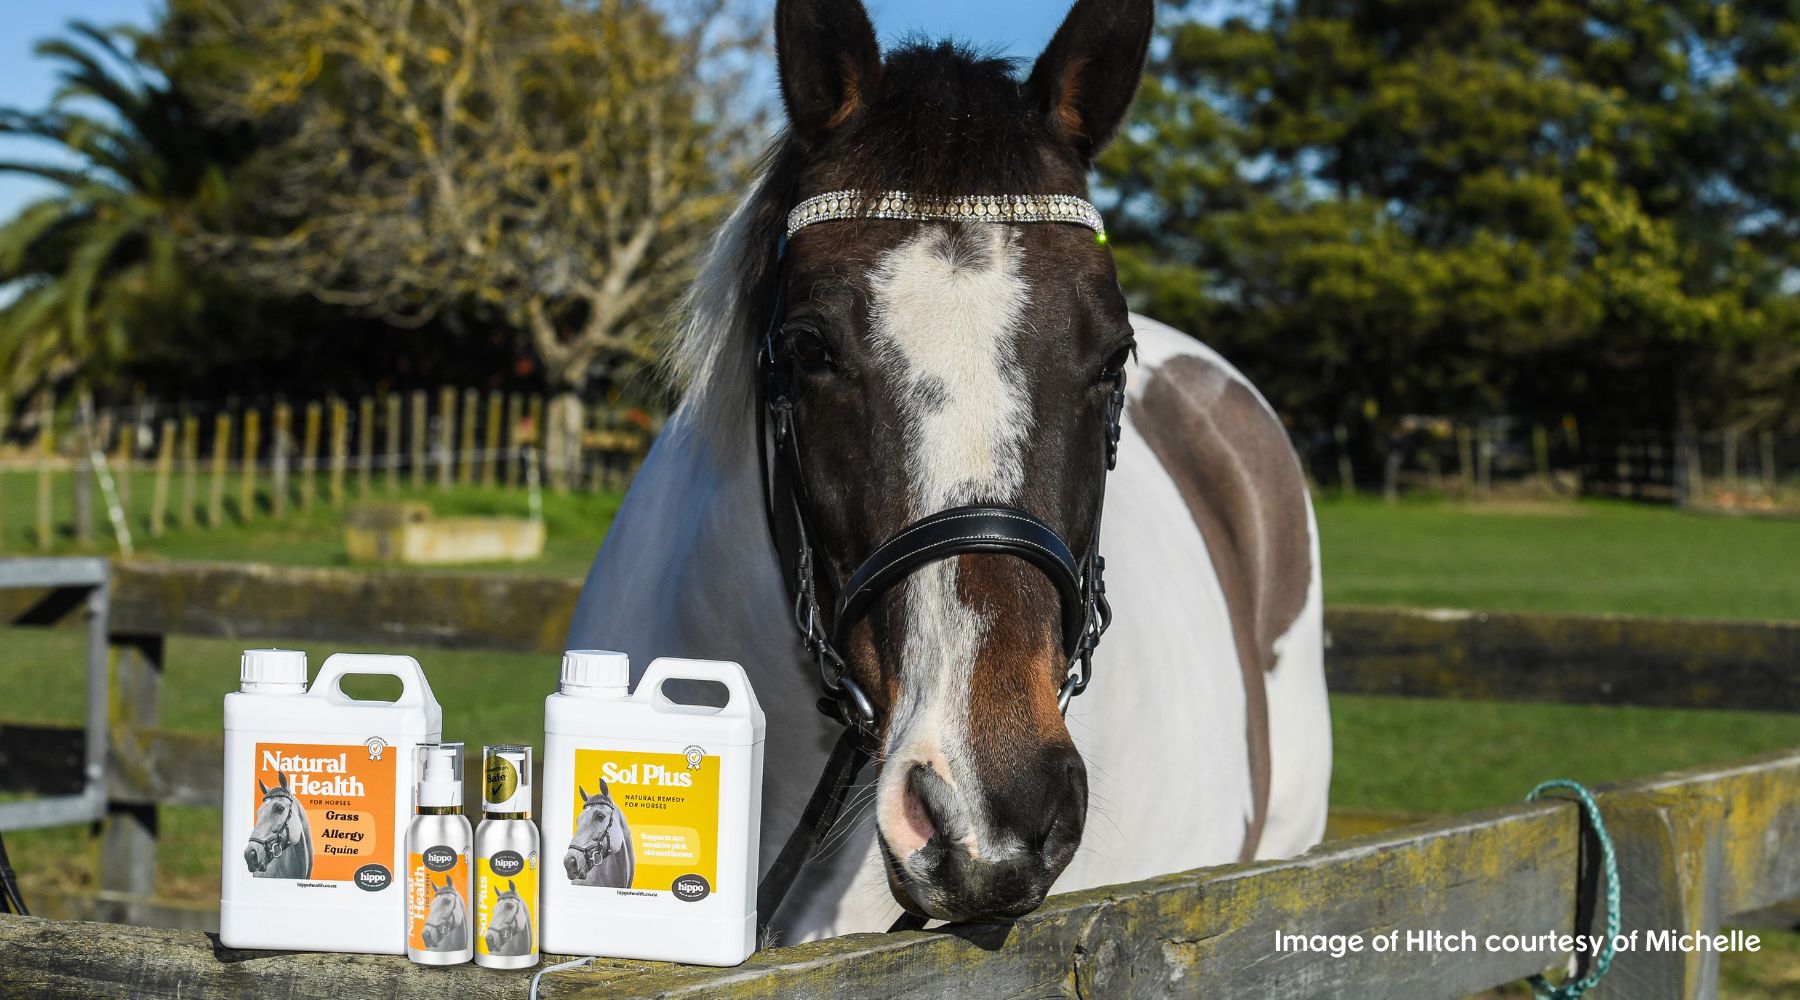 Should I use your Pump Bottle or Jerry Can Natural Remedies for Horses?